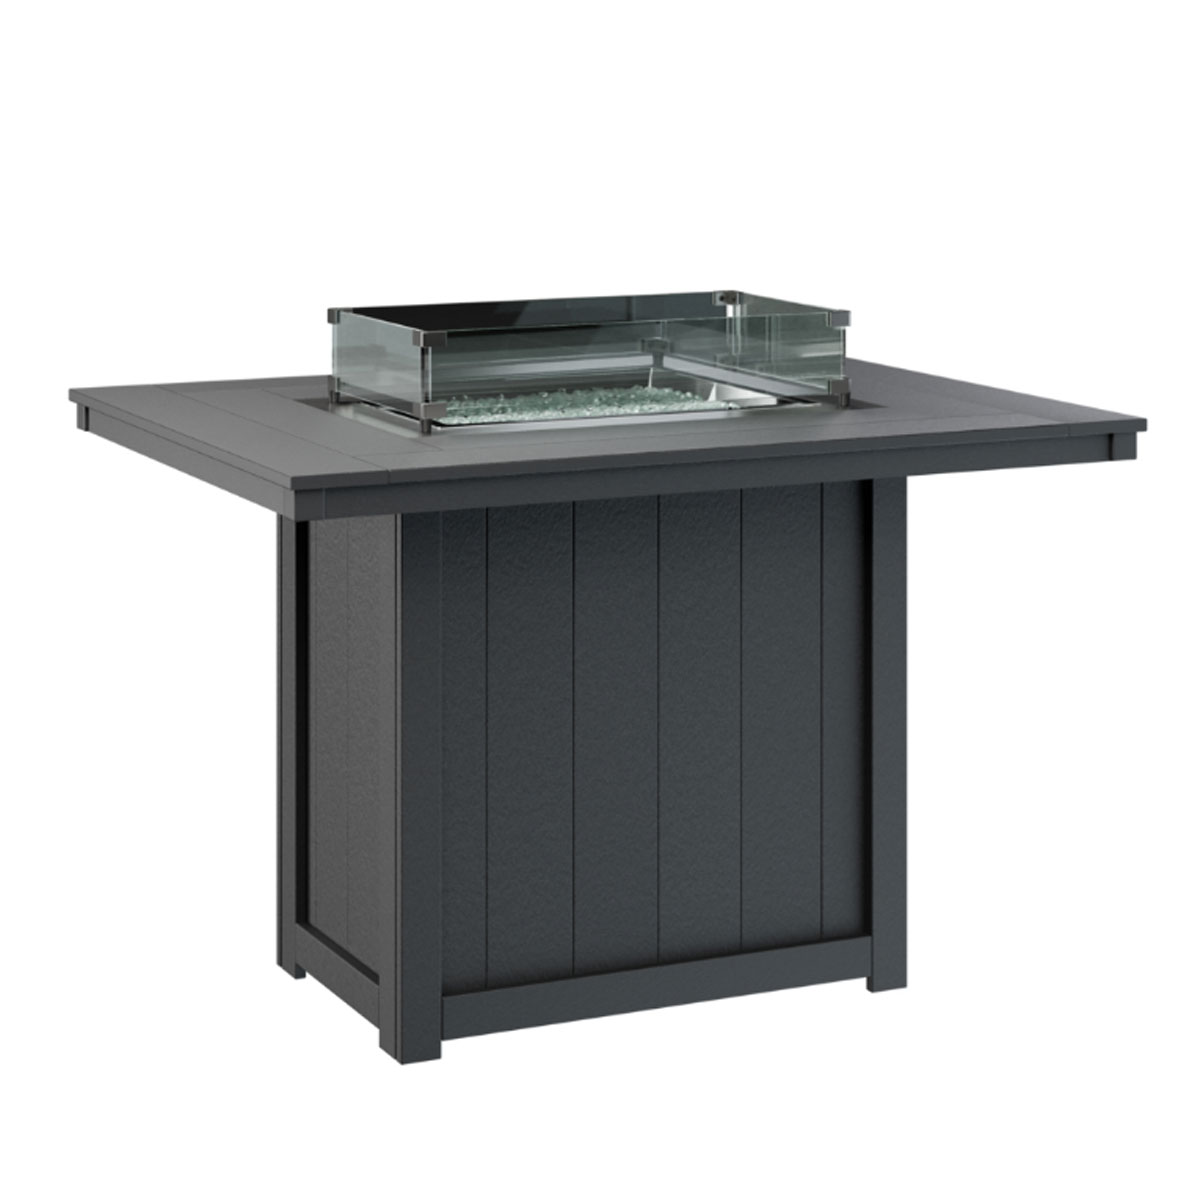 Donoma Poly-Top 42 x 54 Rectangular Counter Height Fire Table 